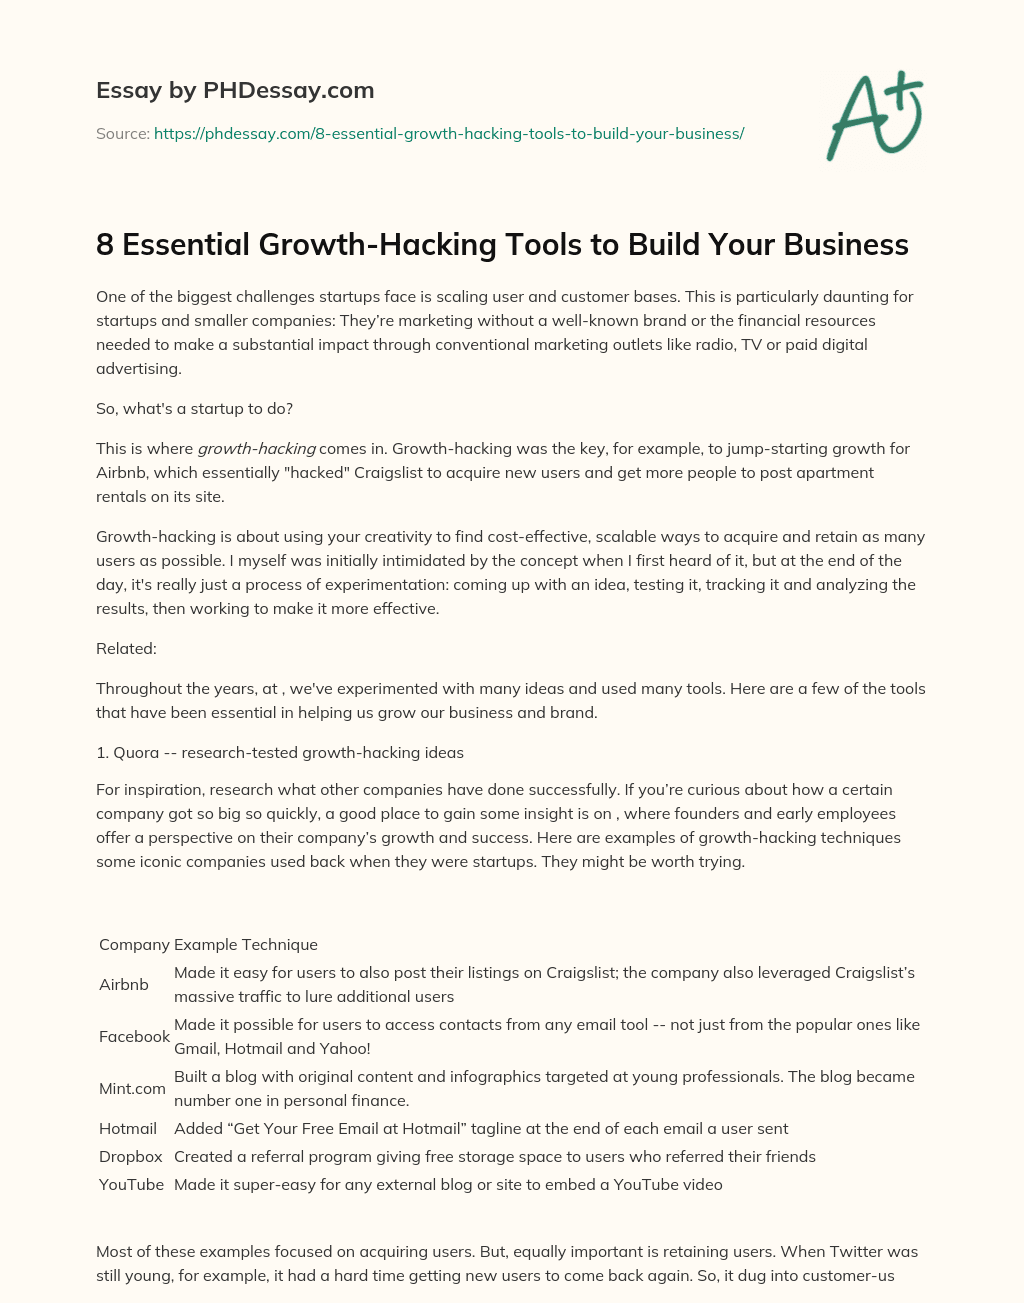 8 Essential Growth-Hacking Tools to Build Your Business essay